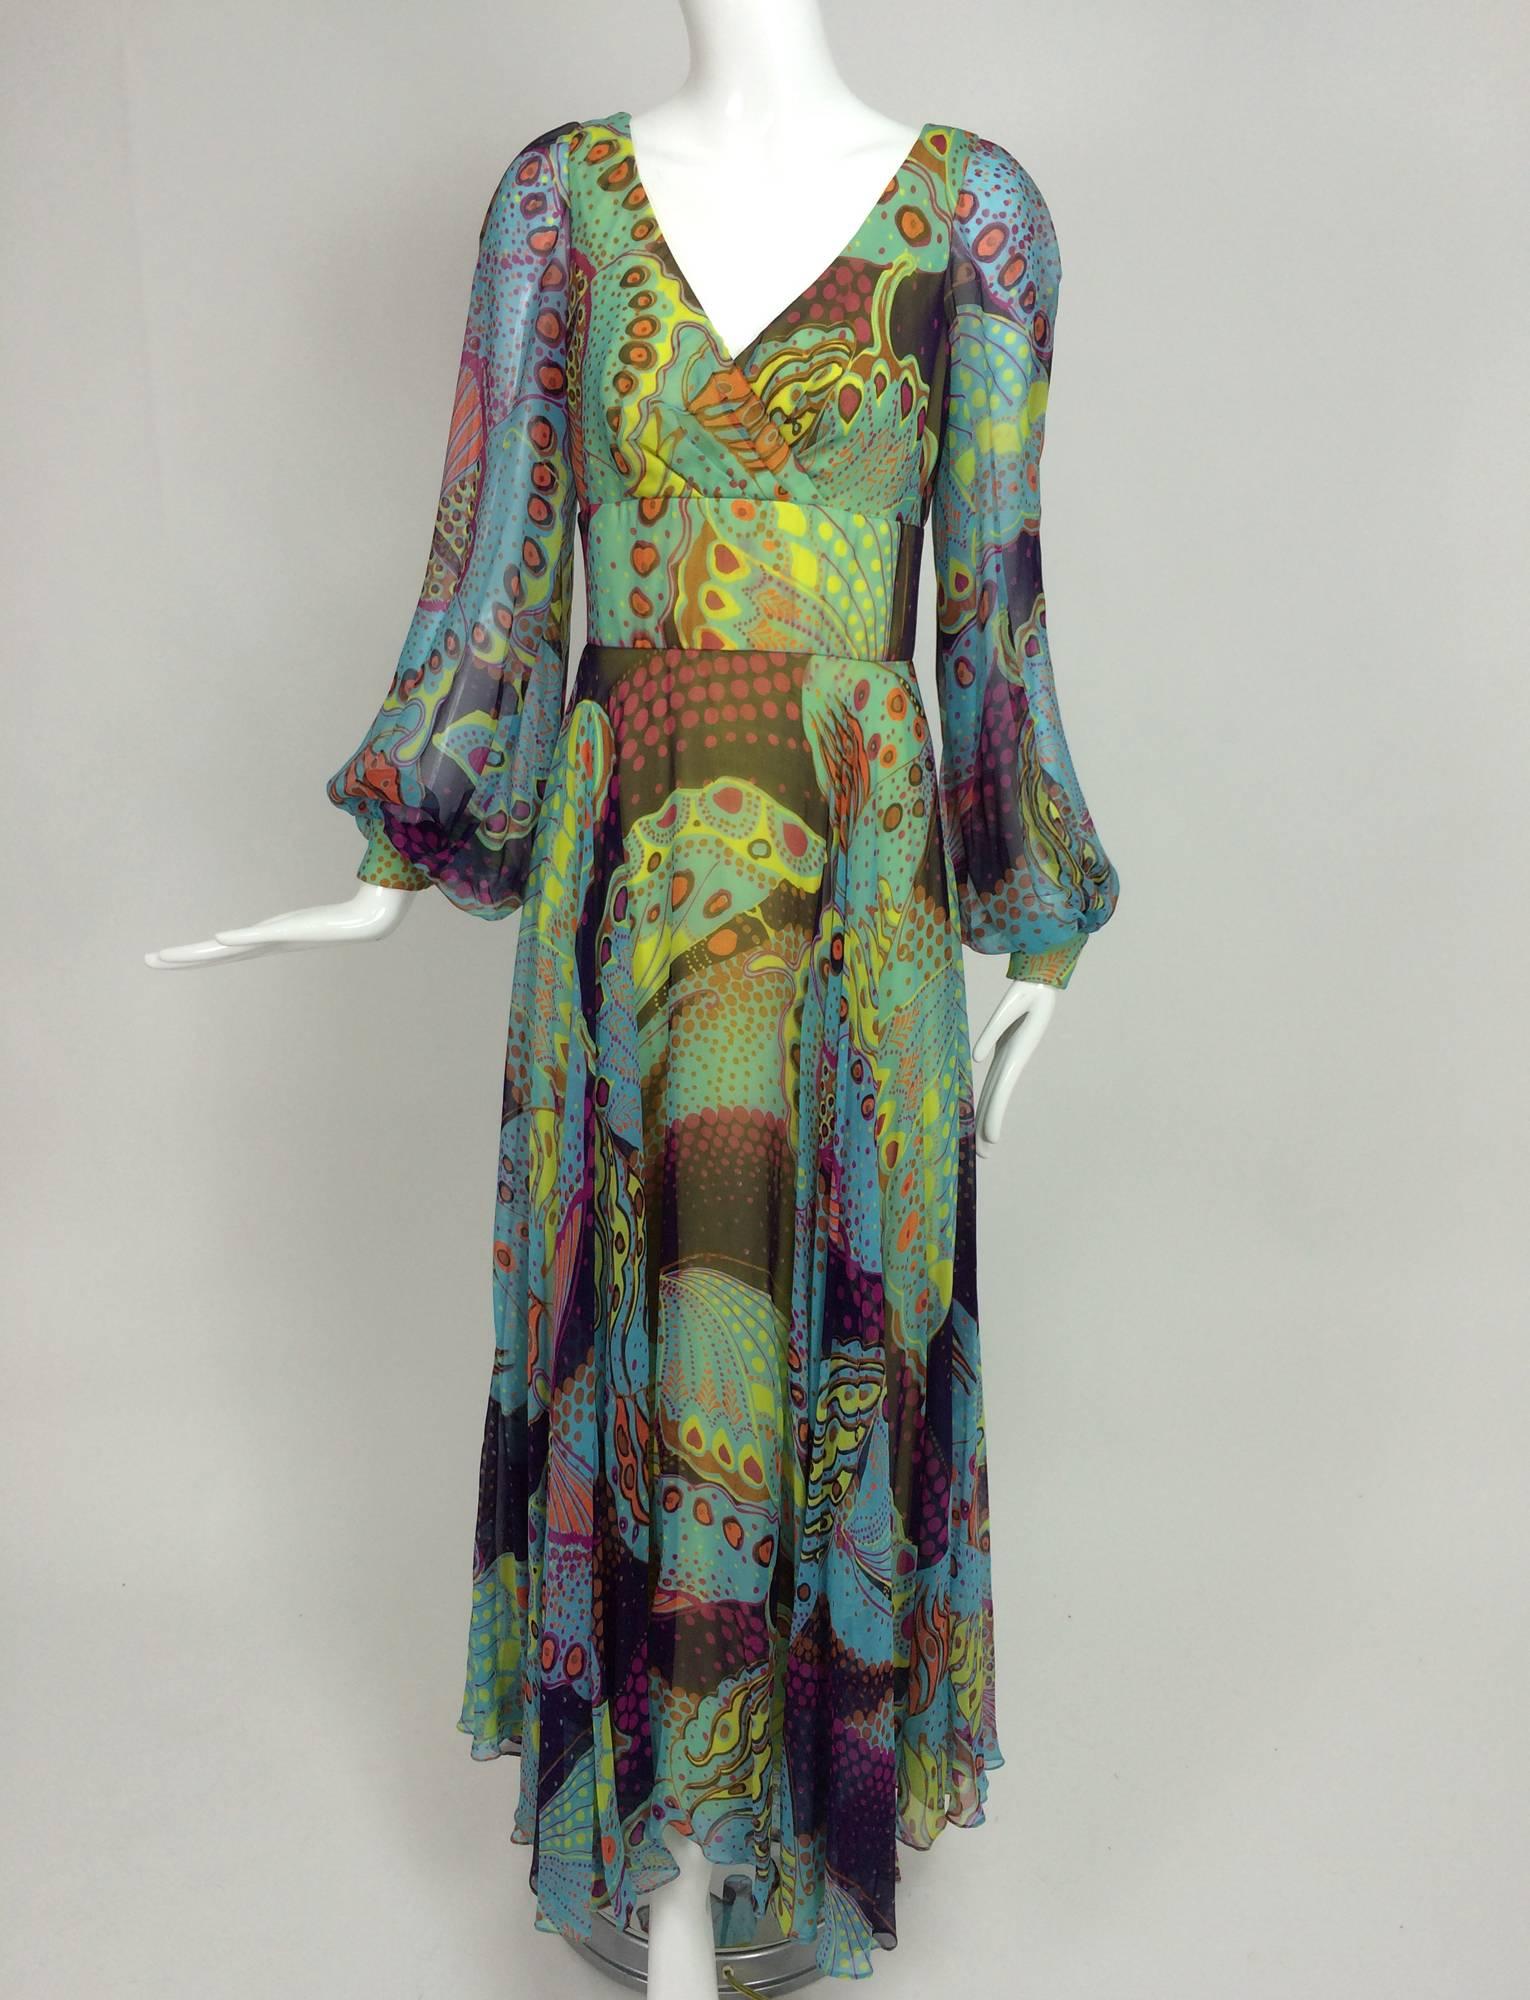 1960s silk chiffon Butterfly print maxi dress 1960s...This dress is made from an amazing silk chiffon print, the colours are vivid...Possibly made especially for the small boutique it was sold at which was called, The Vogue of Boca, Boca Raton,